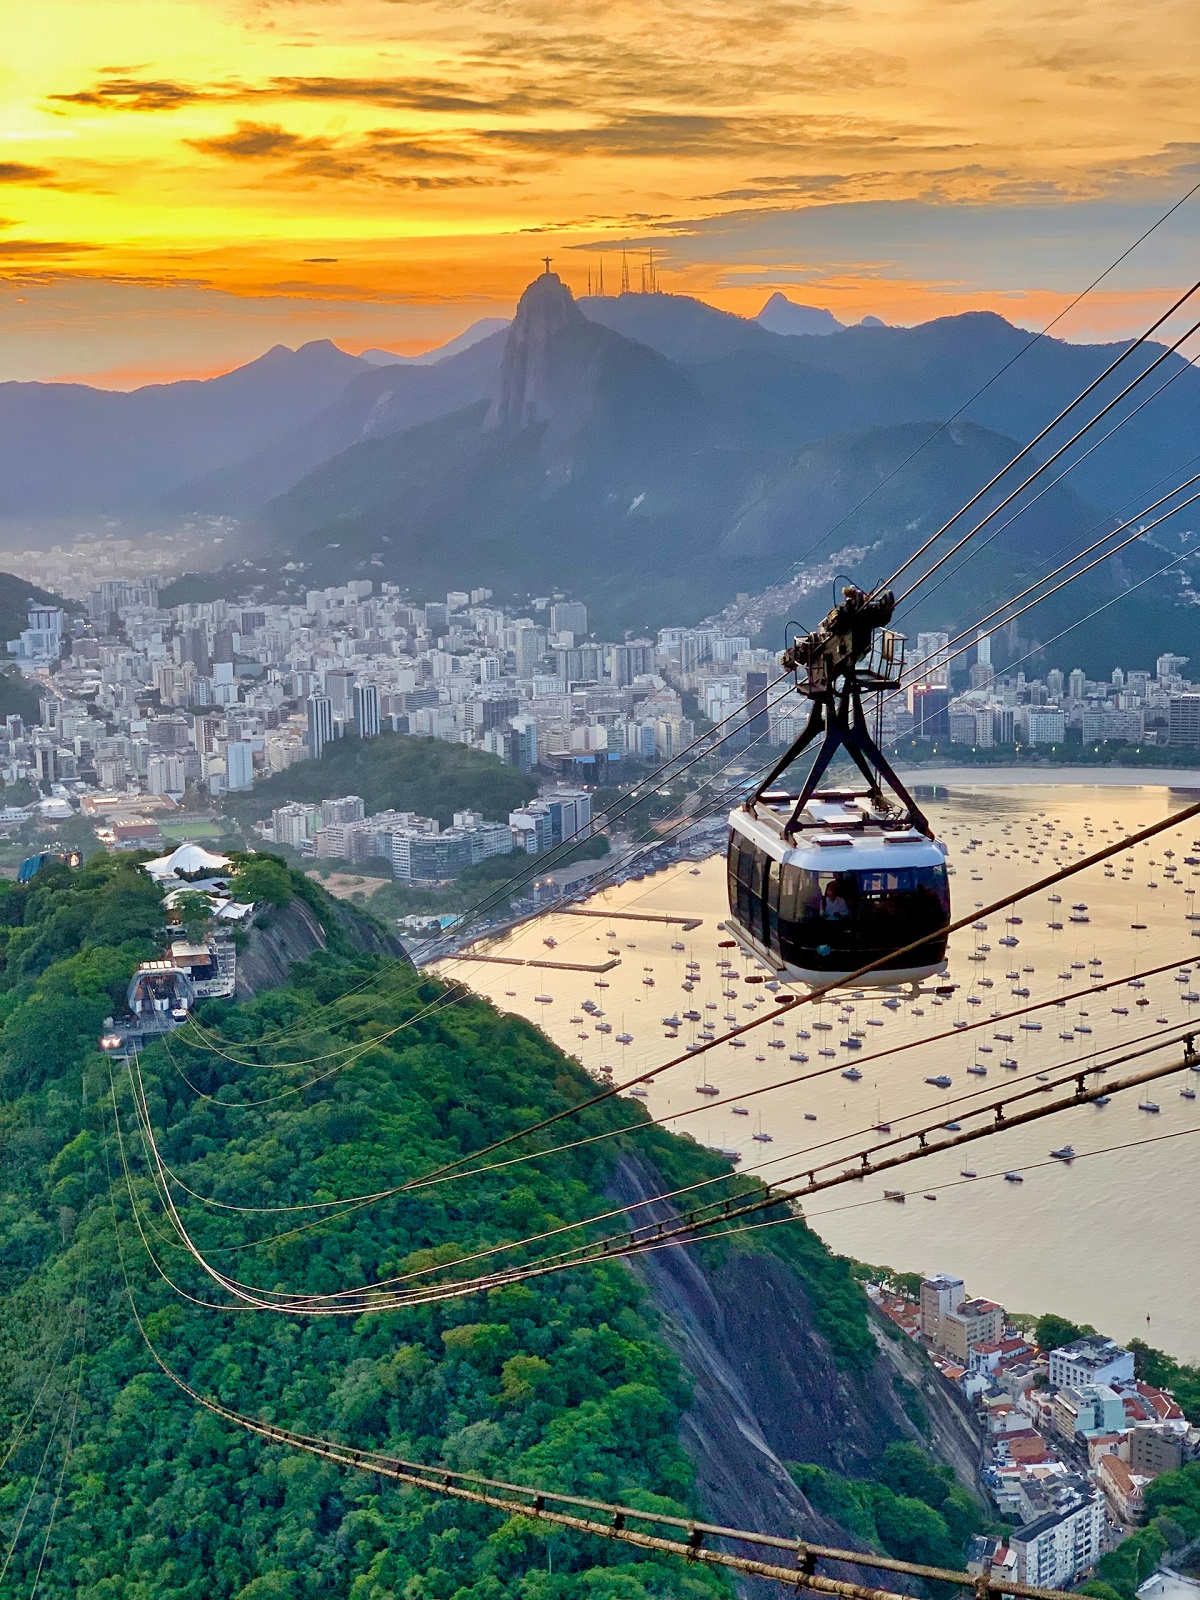 Brazil would occupy eighth place in the ranking of world powers by 2050 and 2075 (Reference image: Raphael Nogueira on Unsplash)